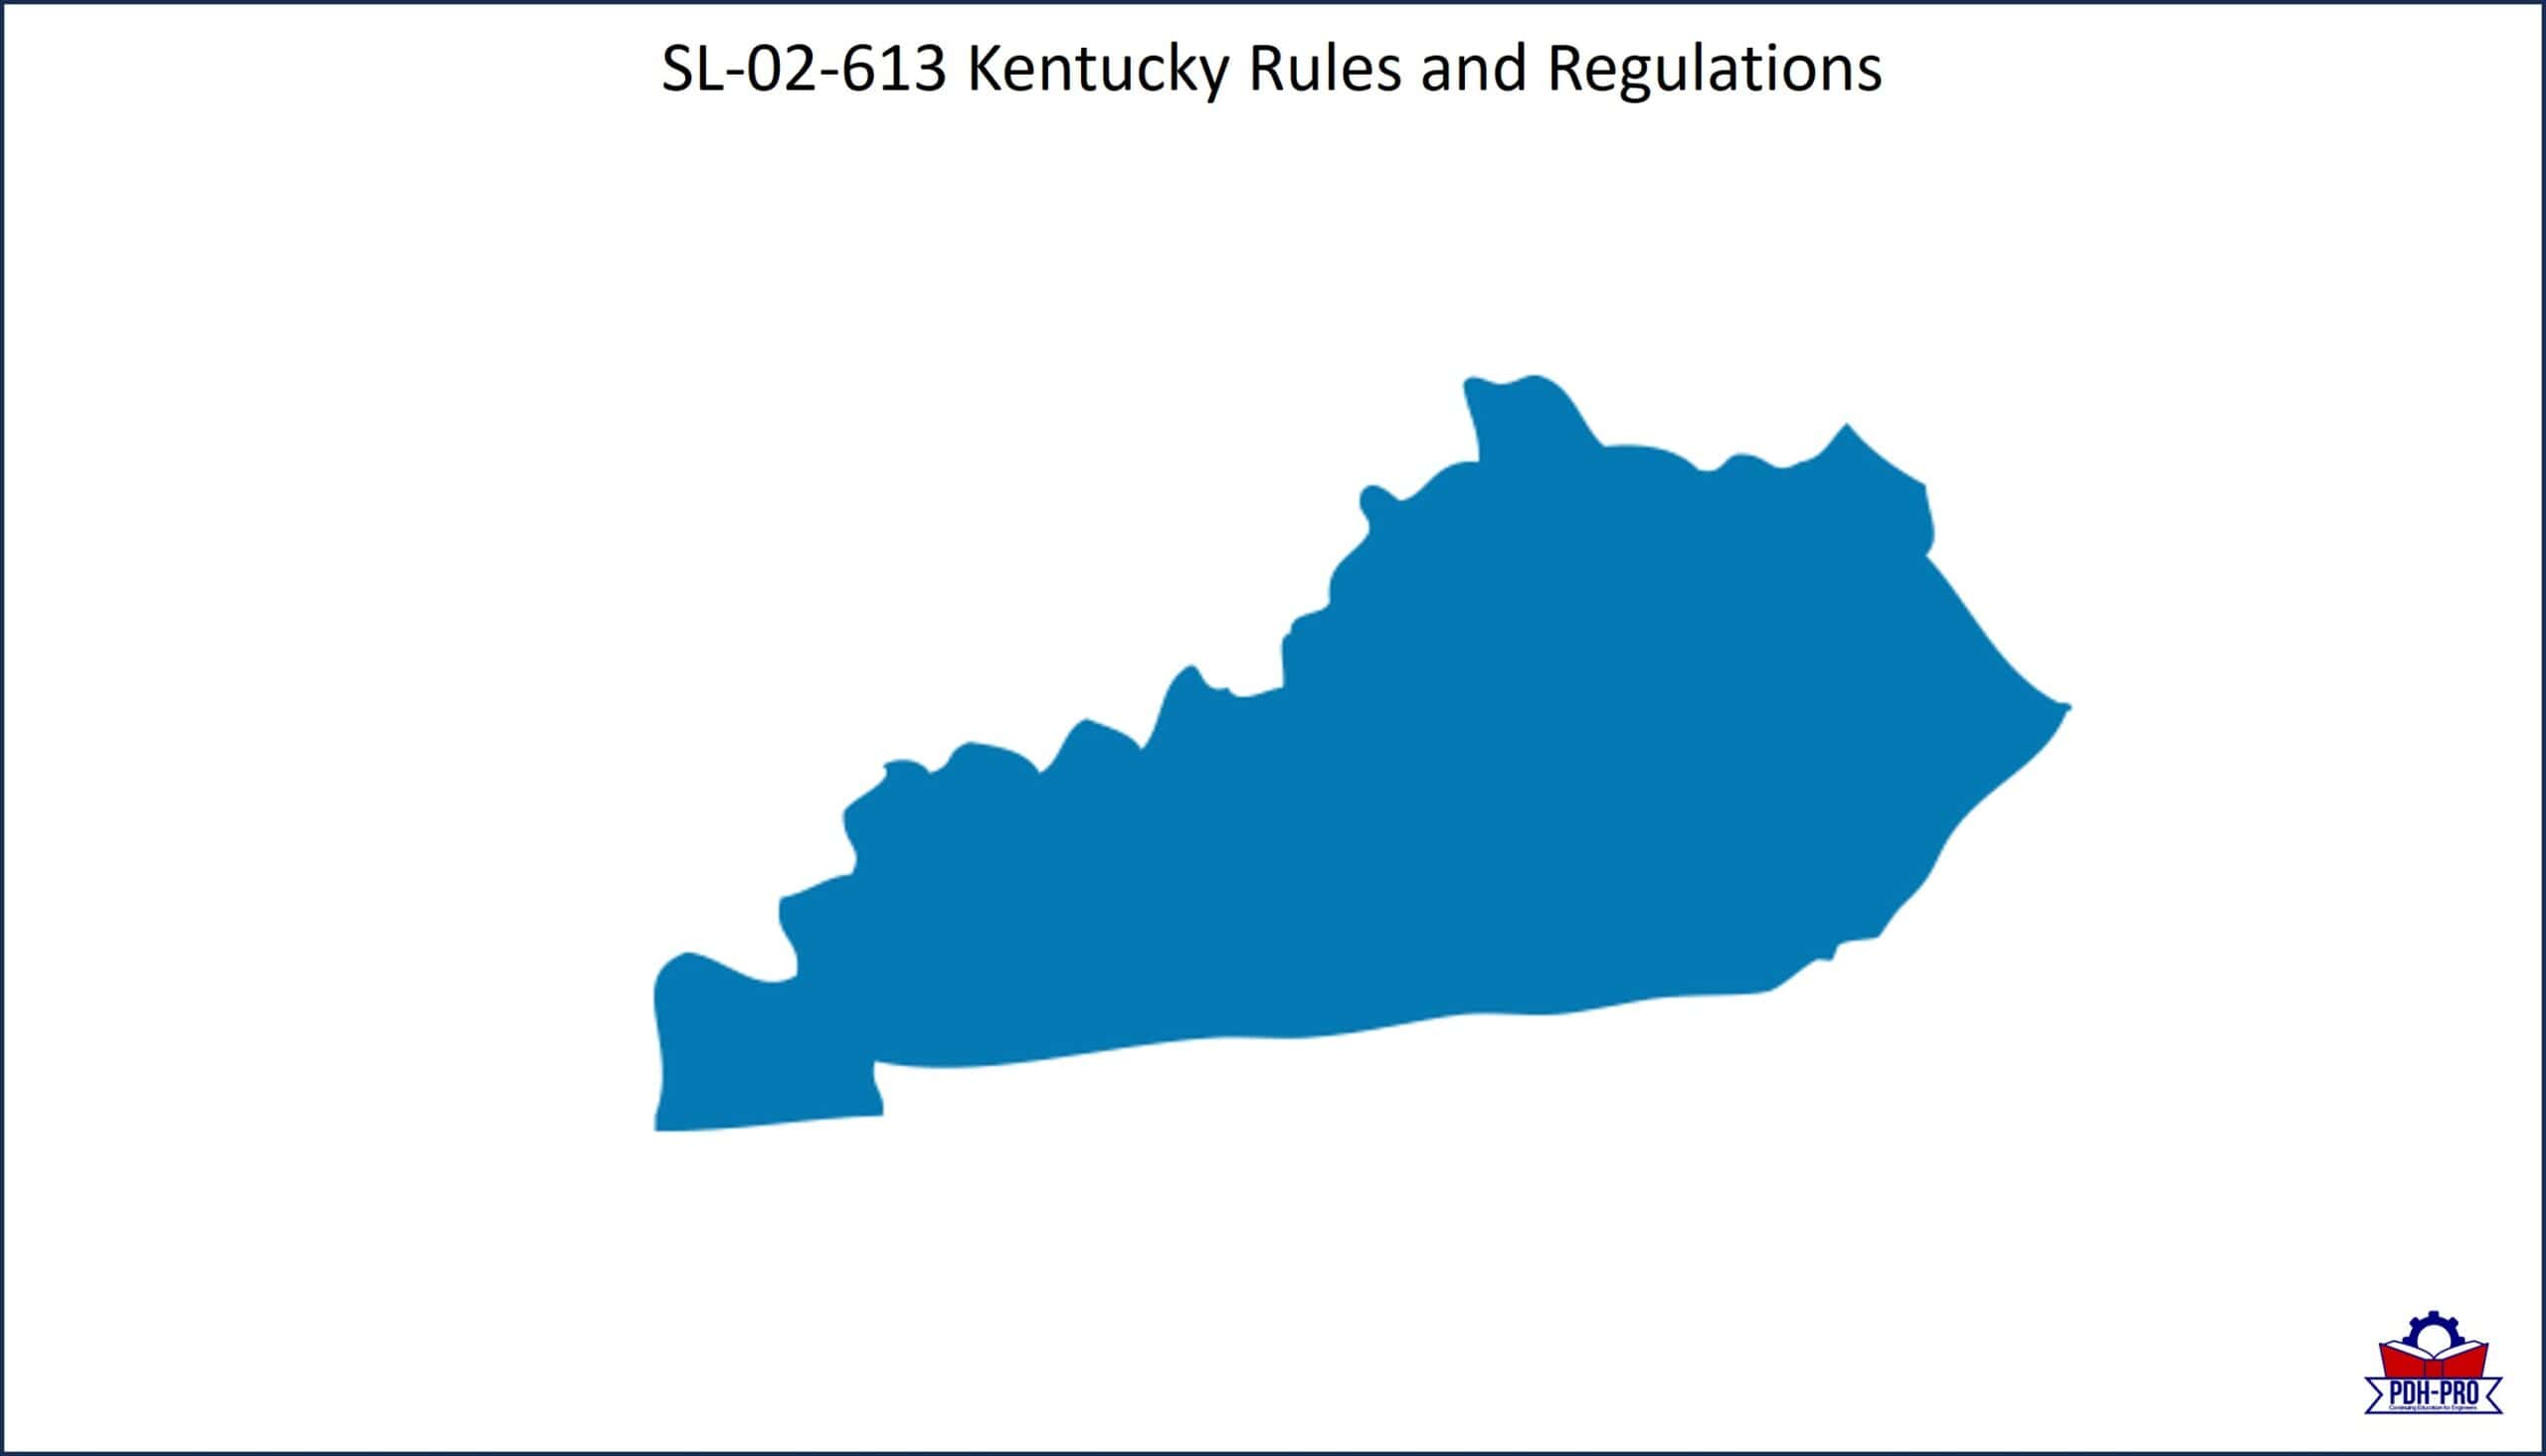 Kentucky Rules and Regulations